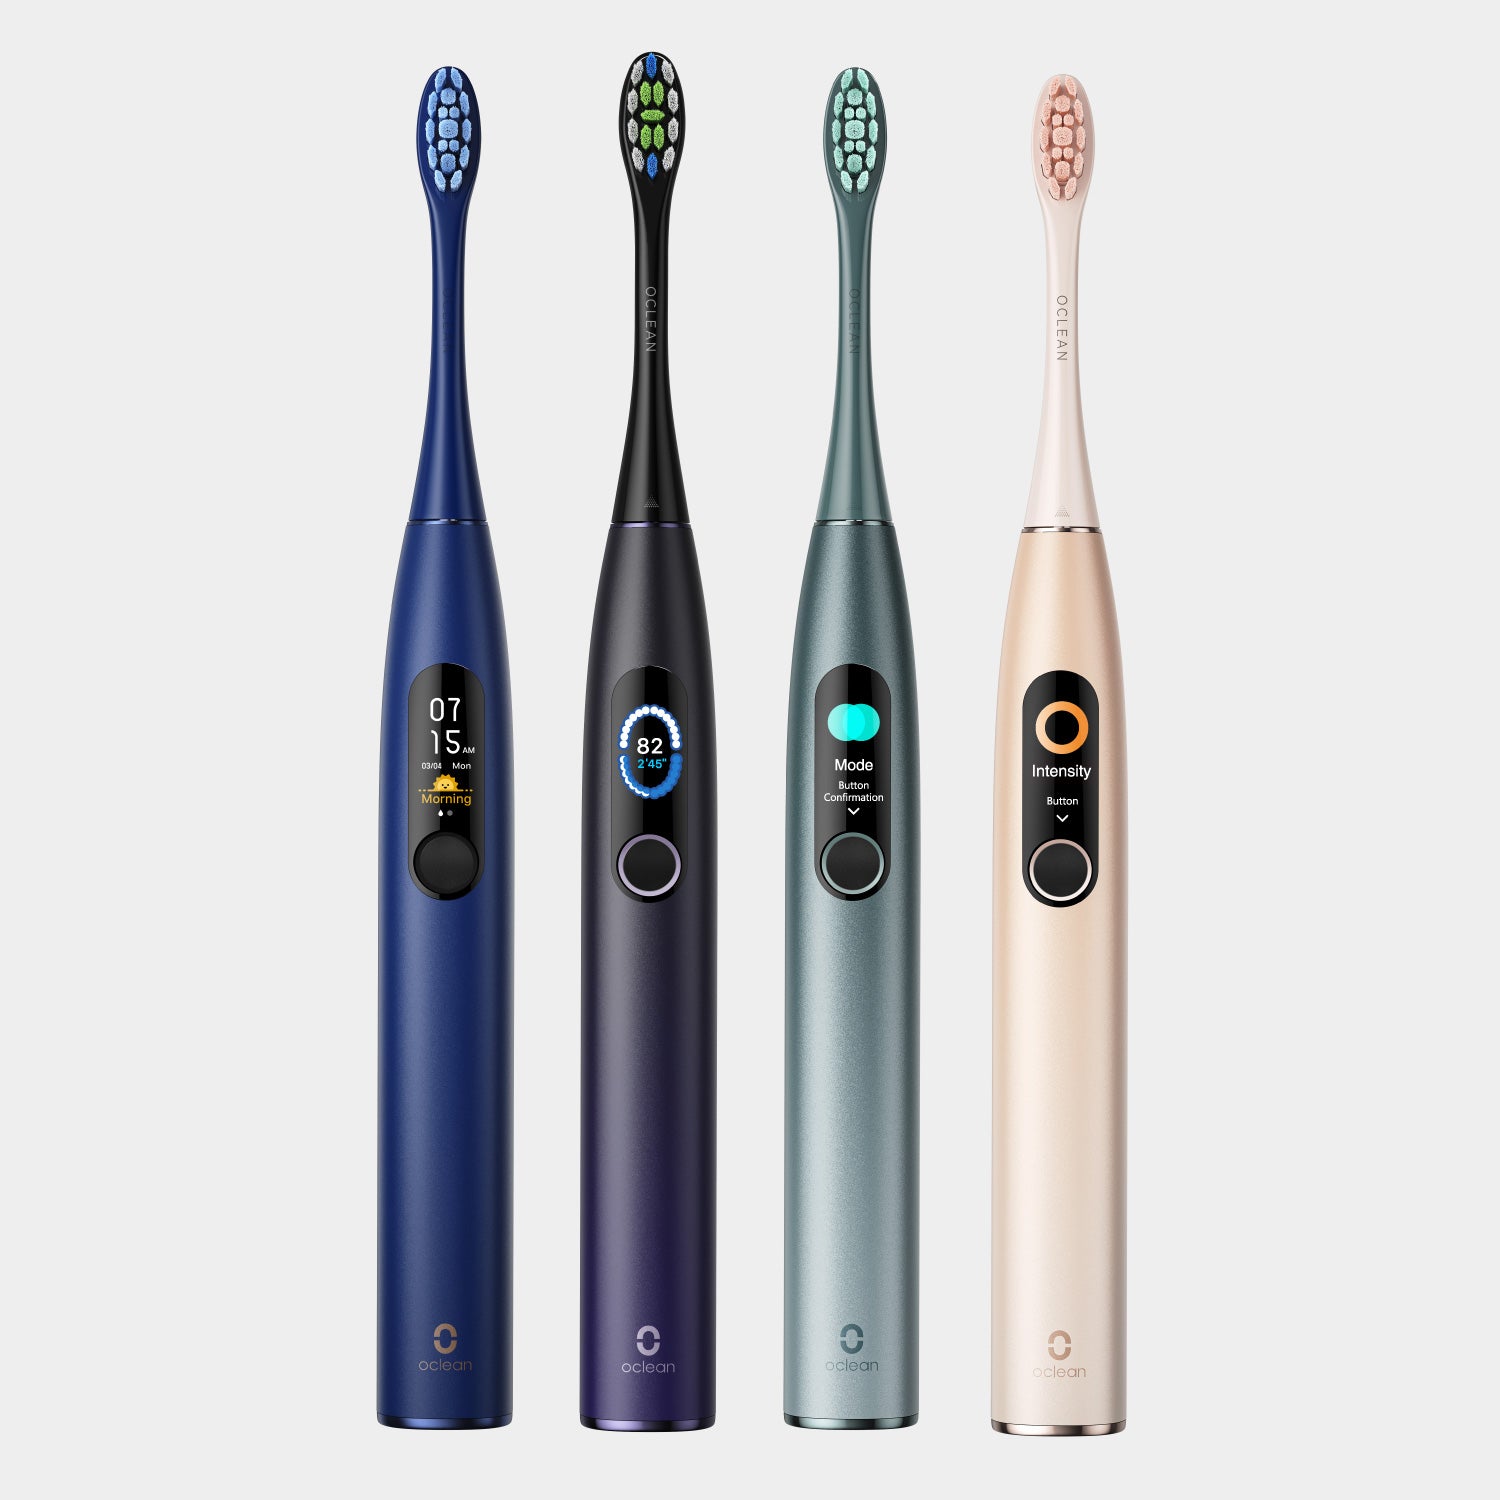 Oclean X Pro Electric Toothbrush-Toothbrushes-Oclean US Store